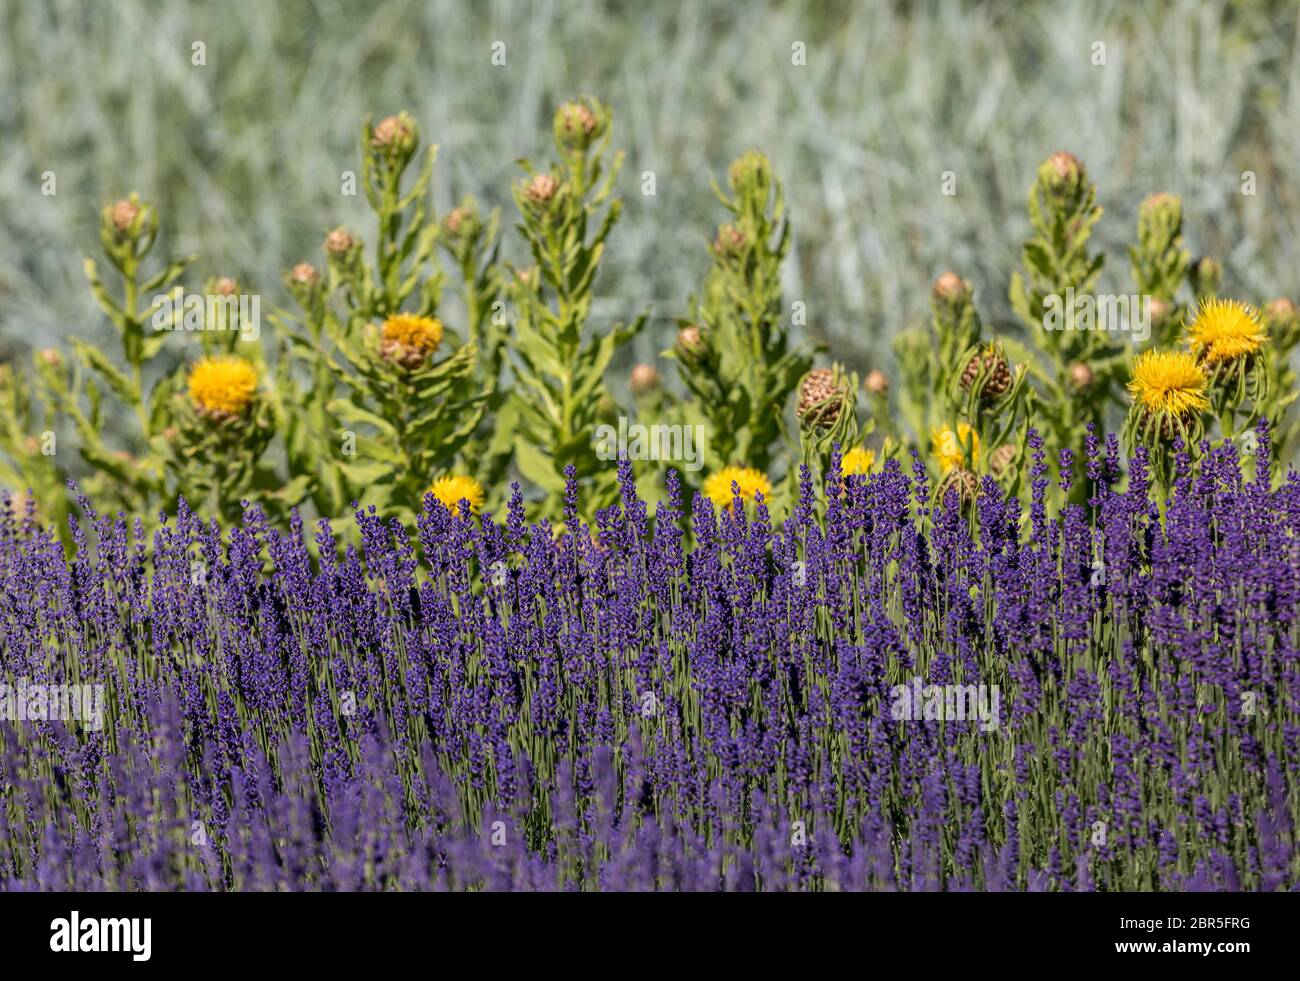 the flourishing lavender and yellow star-thistle flowers Stock Photo